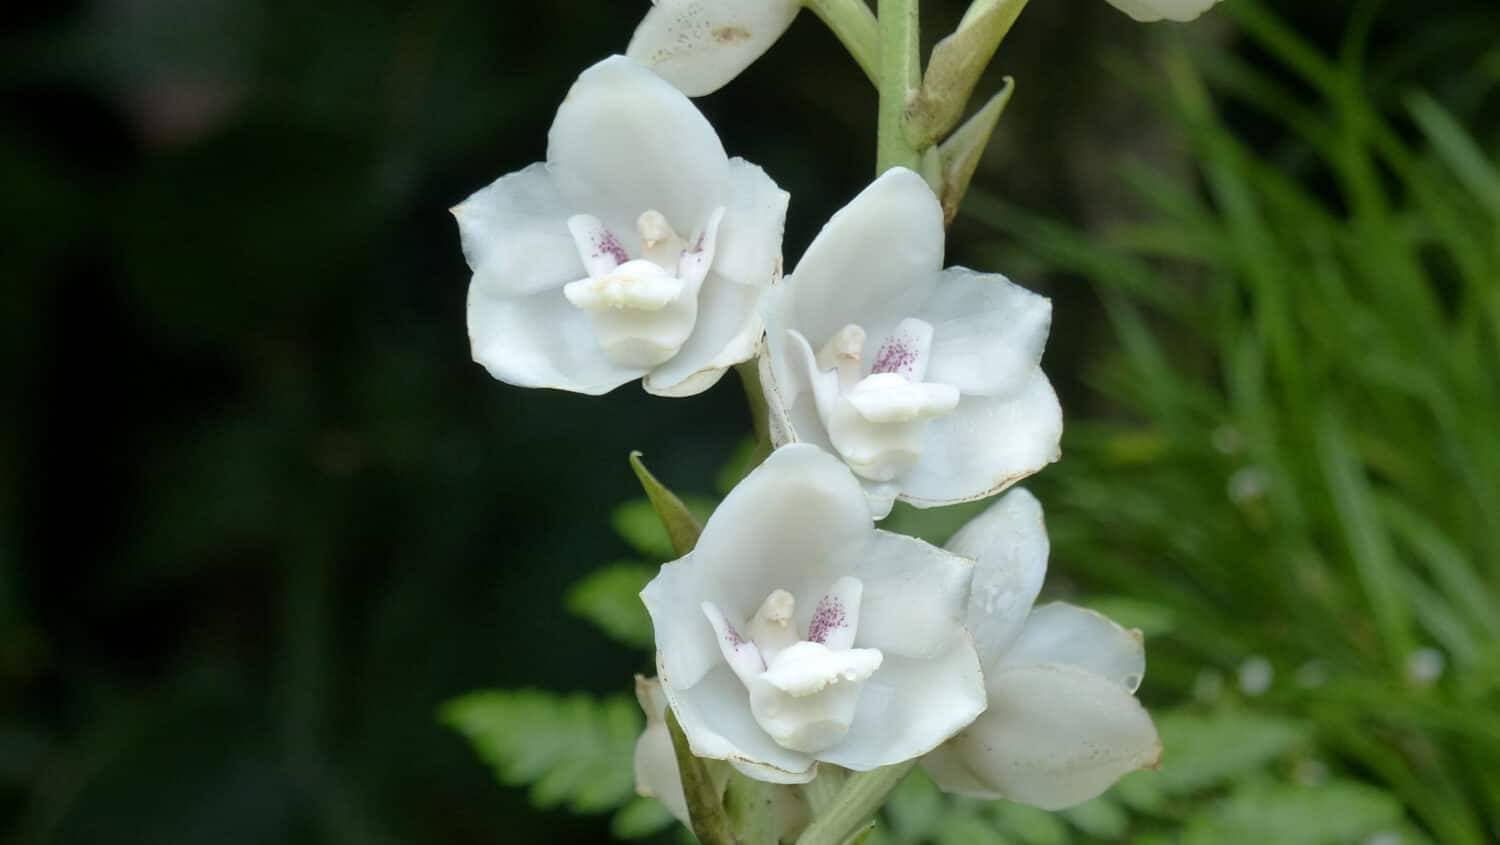 Peristeria elata, is a genus of plants belonging to the family Orchidaceae commonly called dove orchid or Holy Ghost orchid. To be found in Latin America